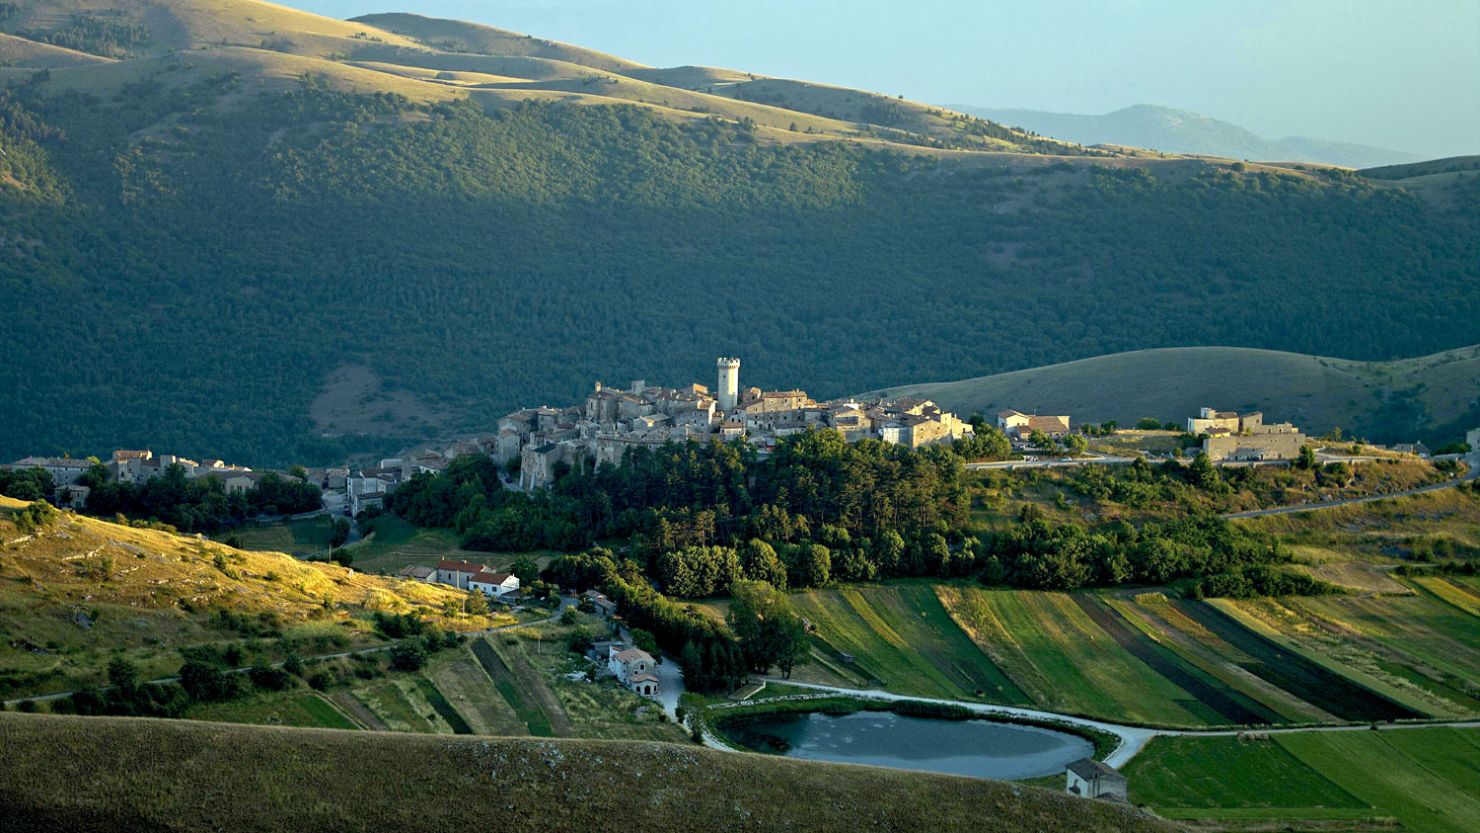 Santo Stefano di Sessanio has about 60 year-round residents